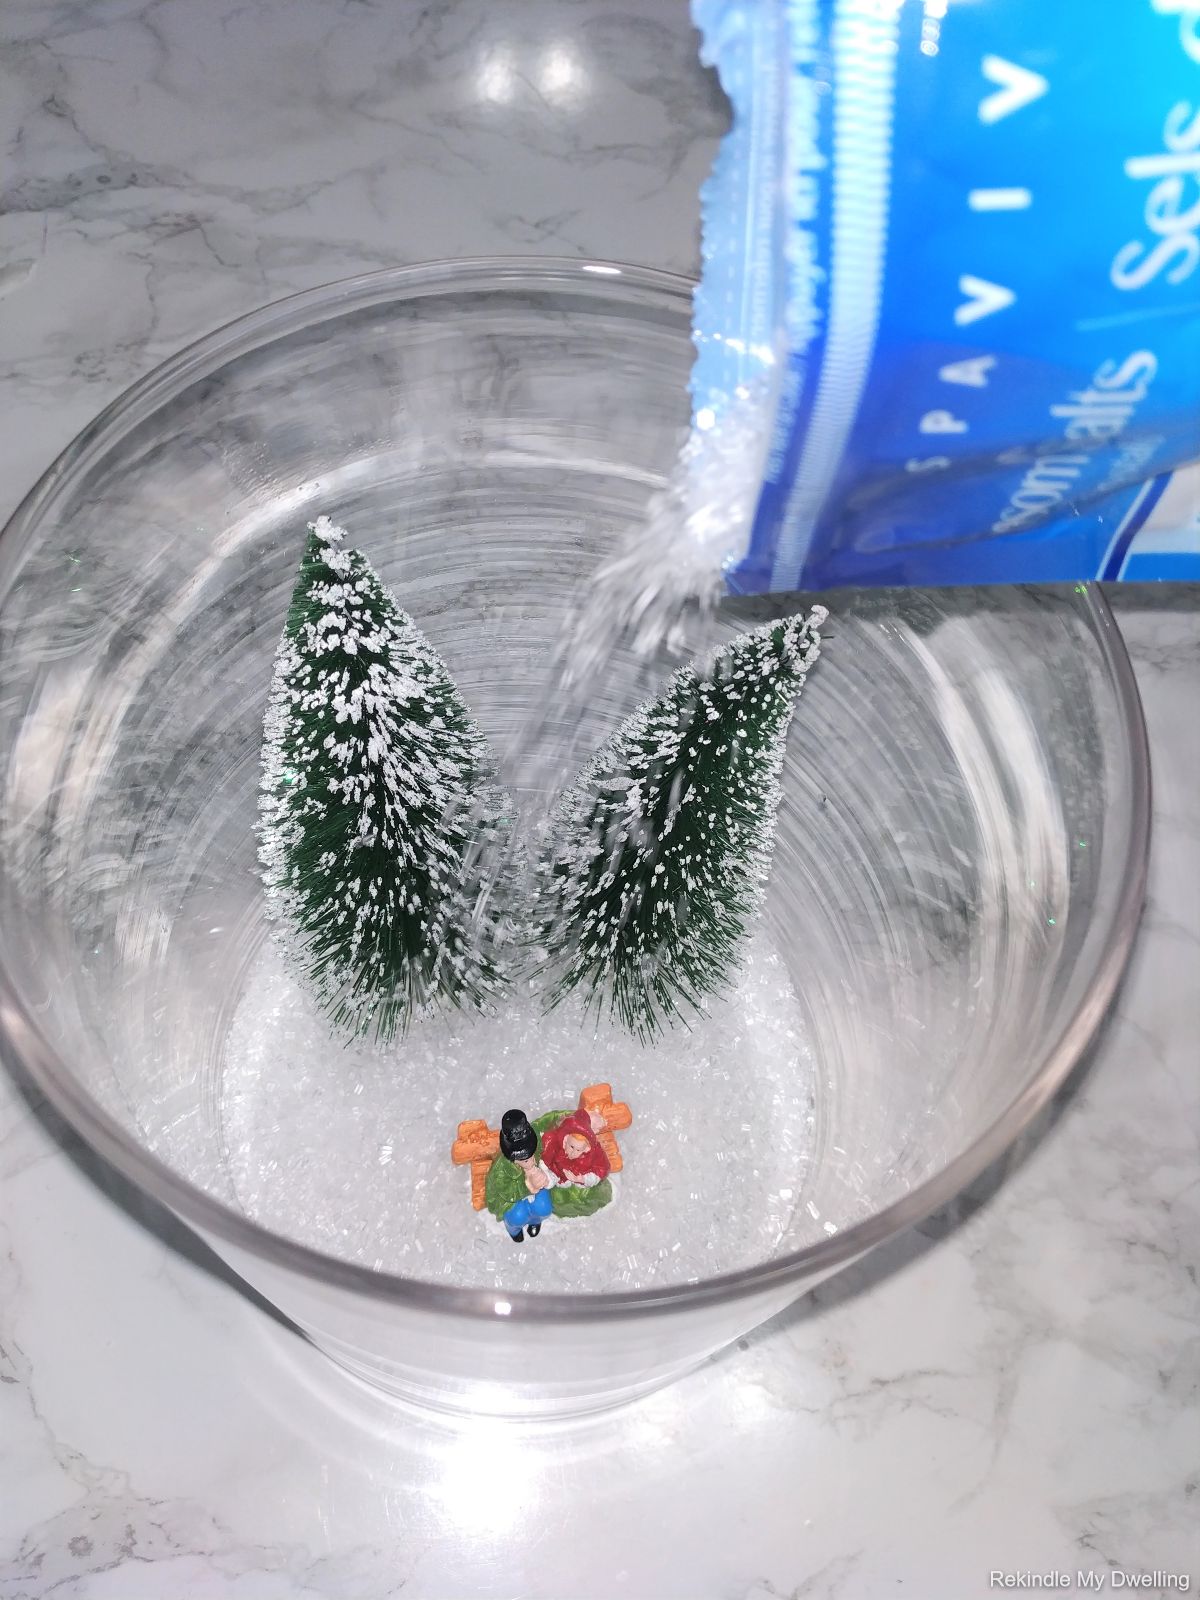 Pouring Epsom salts into the dollar store decorative Christmas jar.